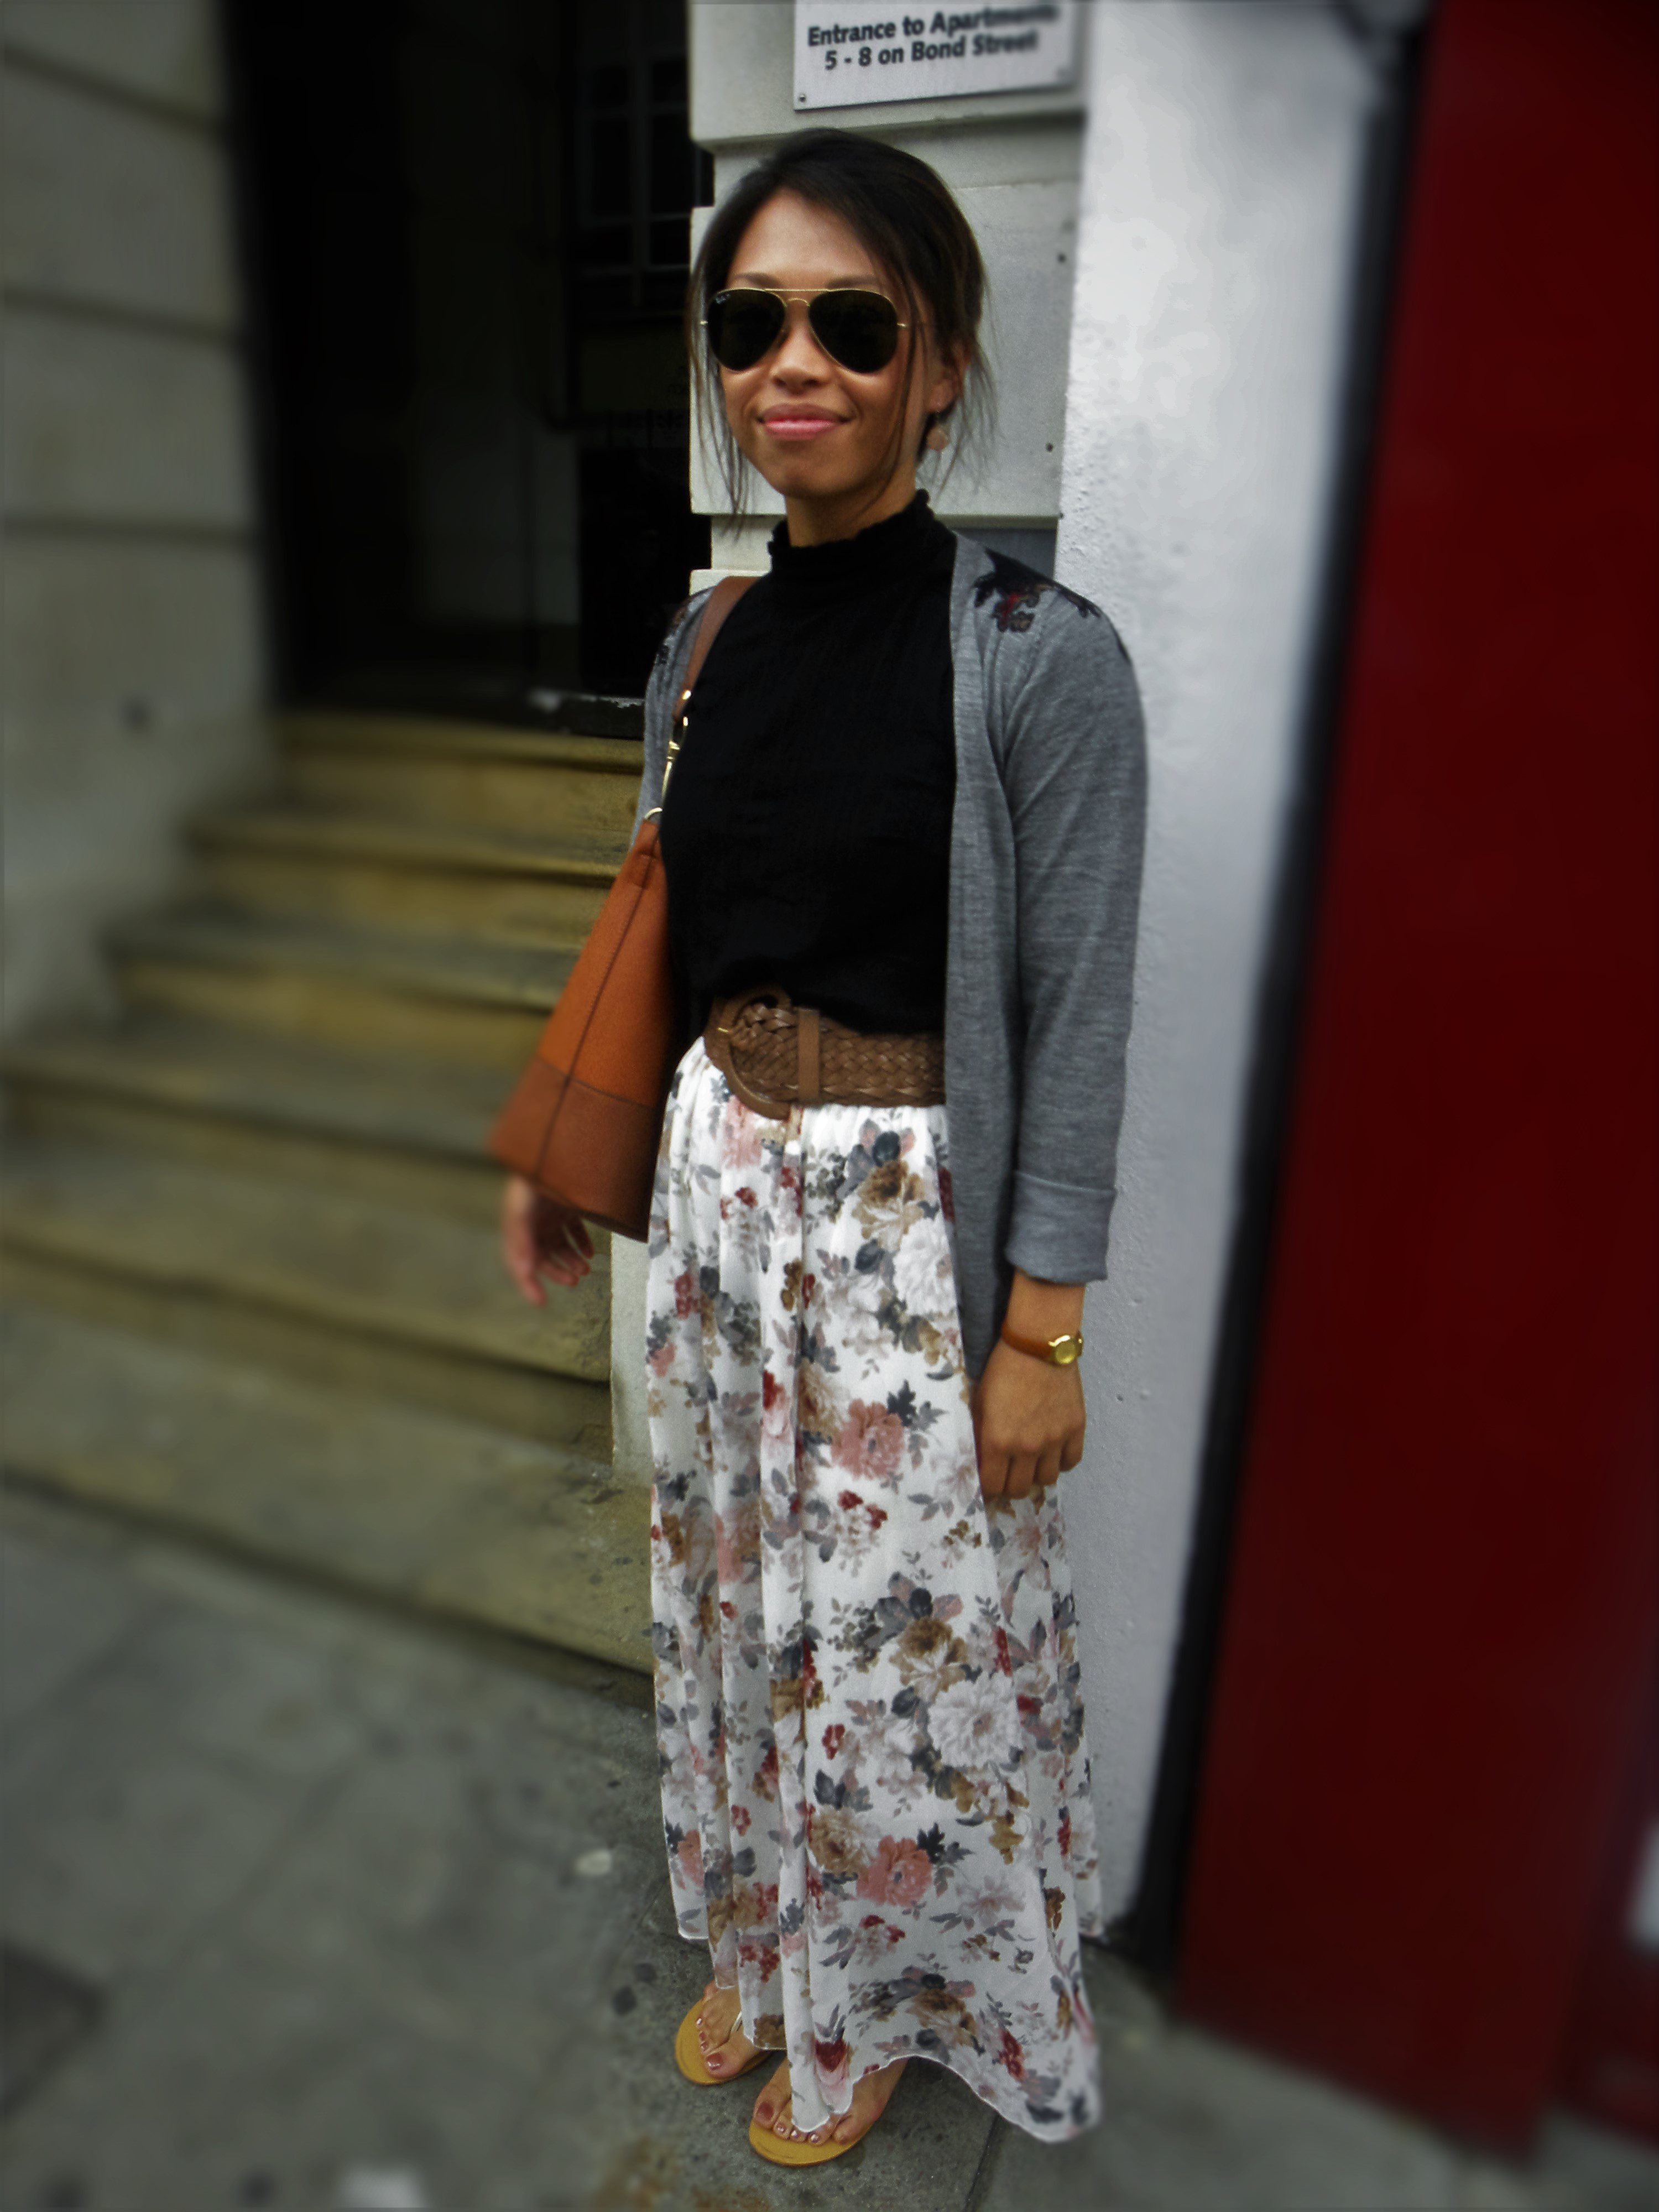 Tina is wearing a skirt and shoes from Taiwan, a vest from Scenario, sunglasses RayBan and bag from Top Shop.